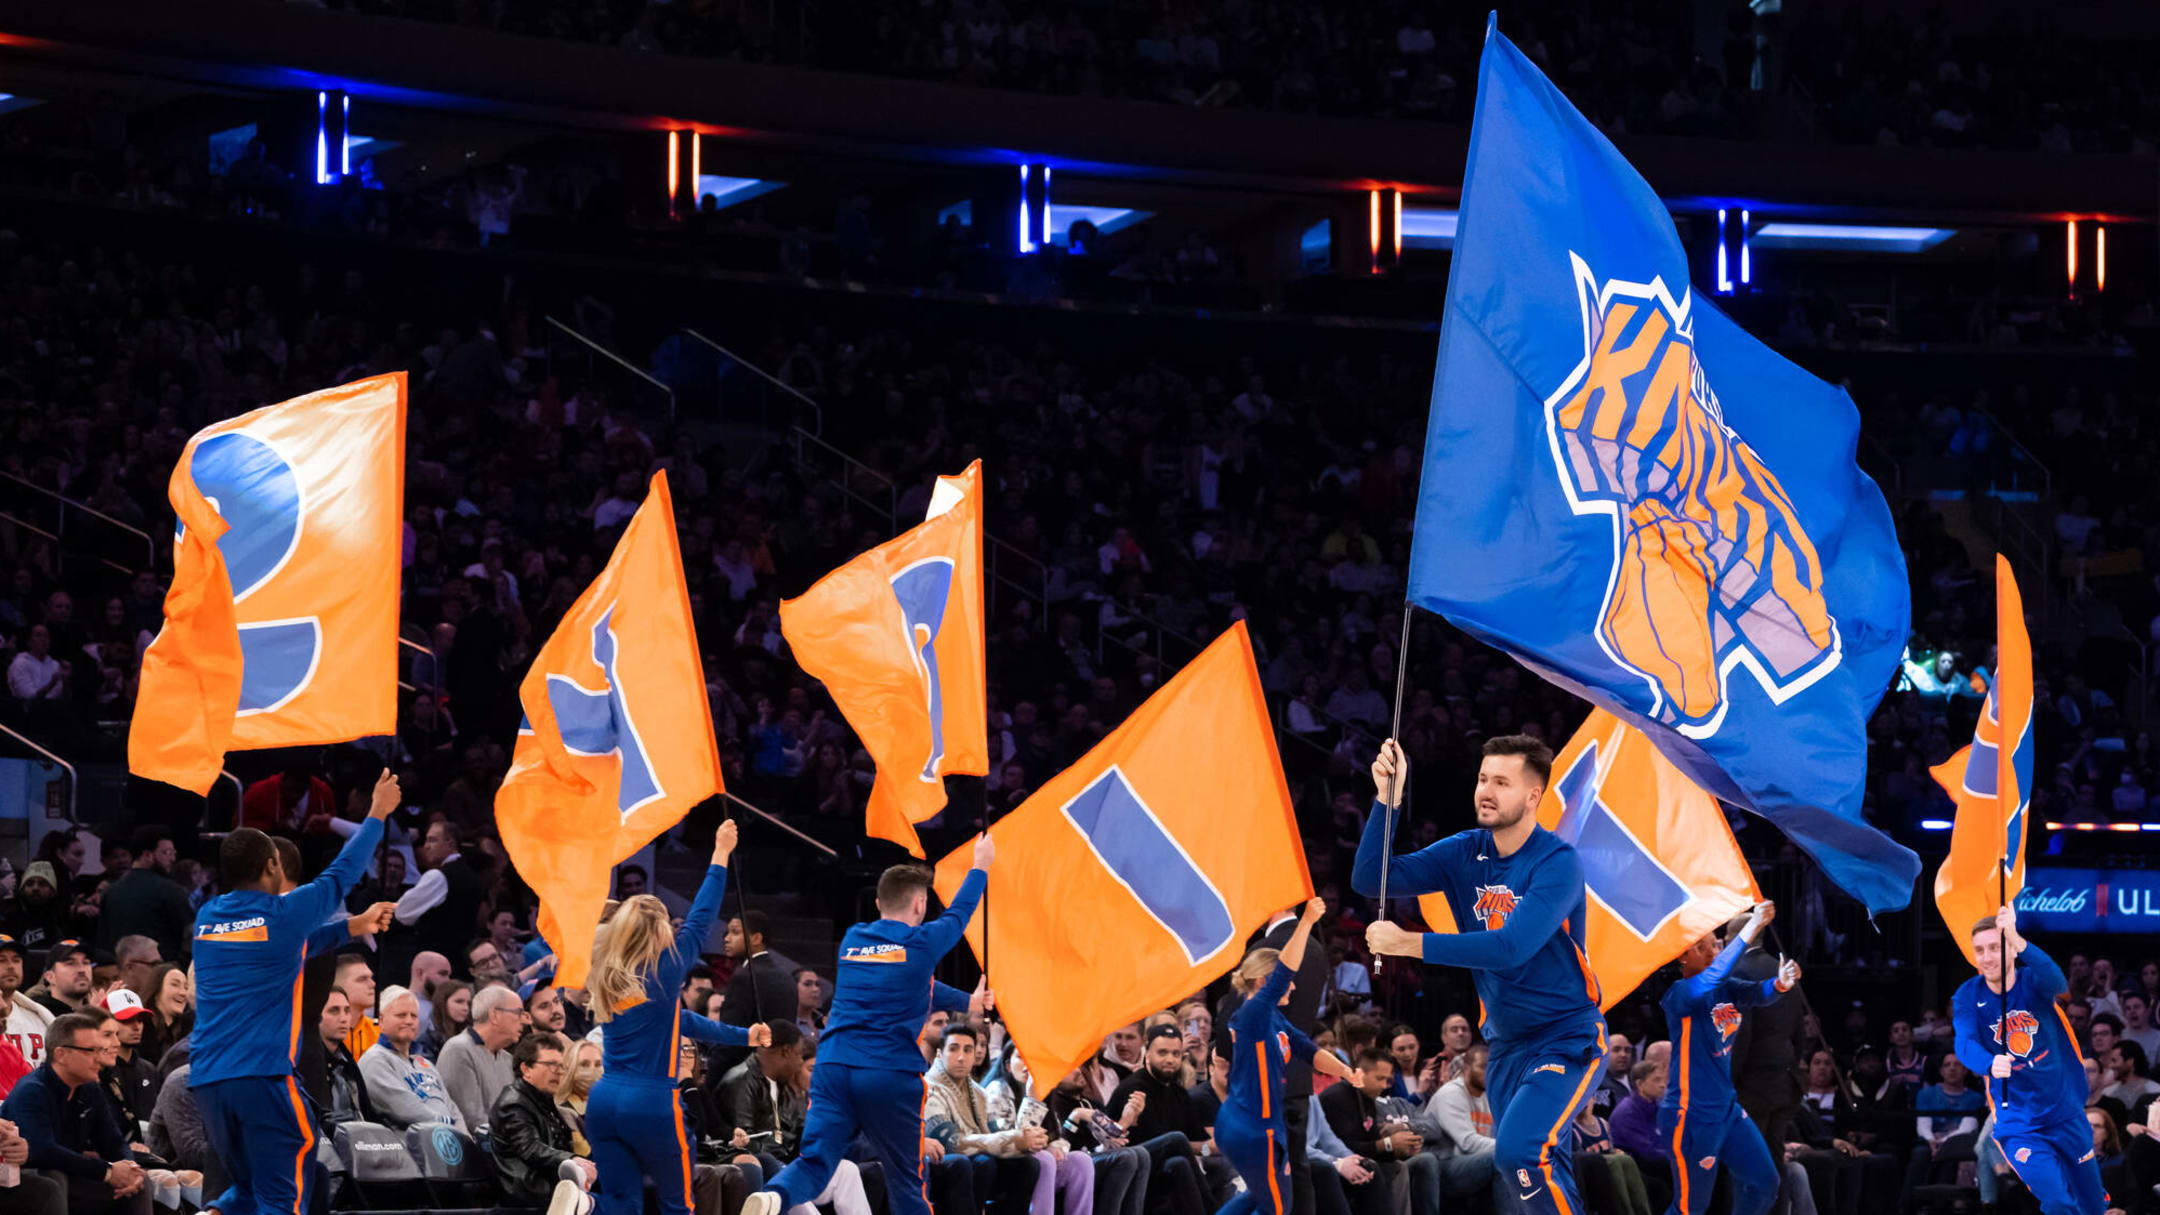 MSG Sports Open to Selling Stake in Knicks, Rangers